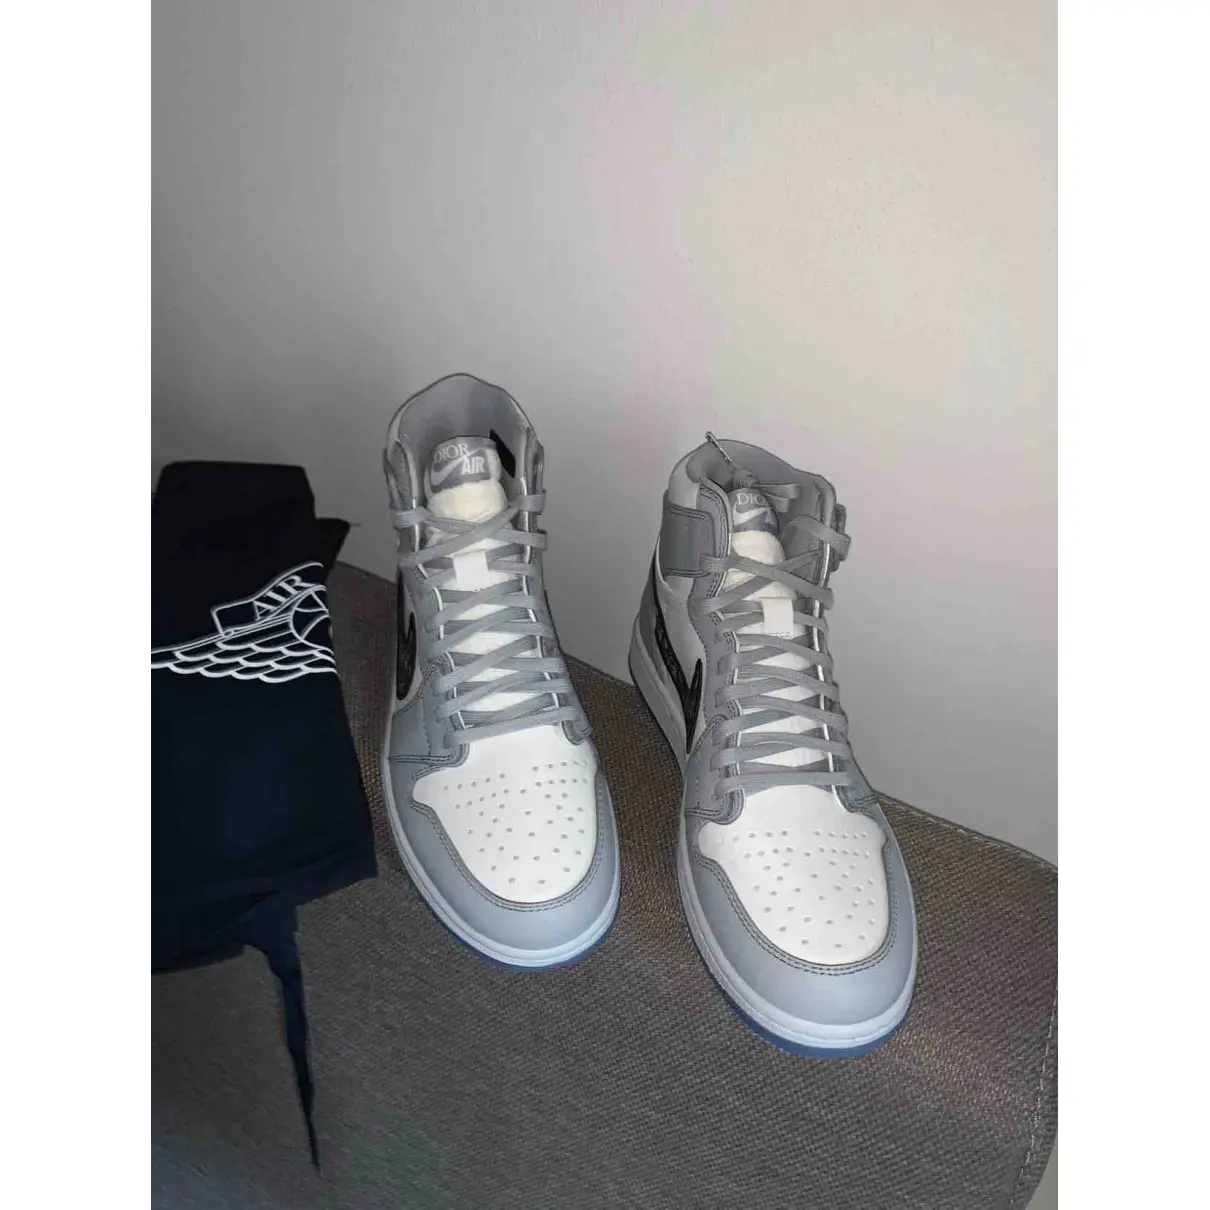 Buy Jordan x Dior Leather high trainers online